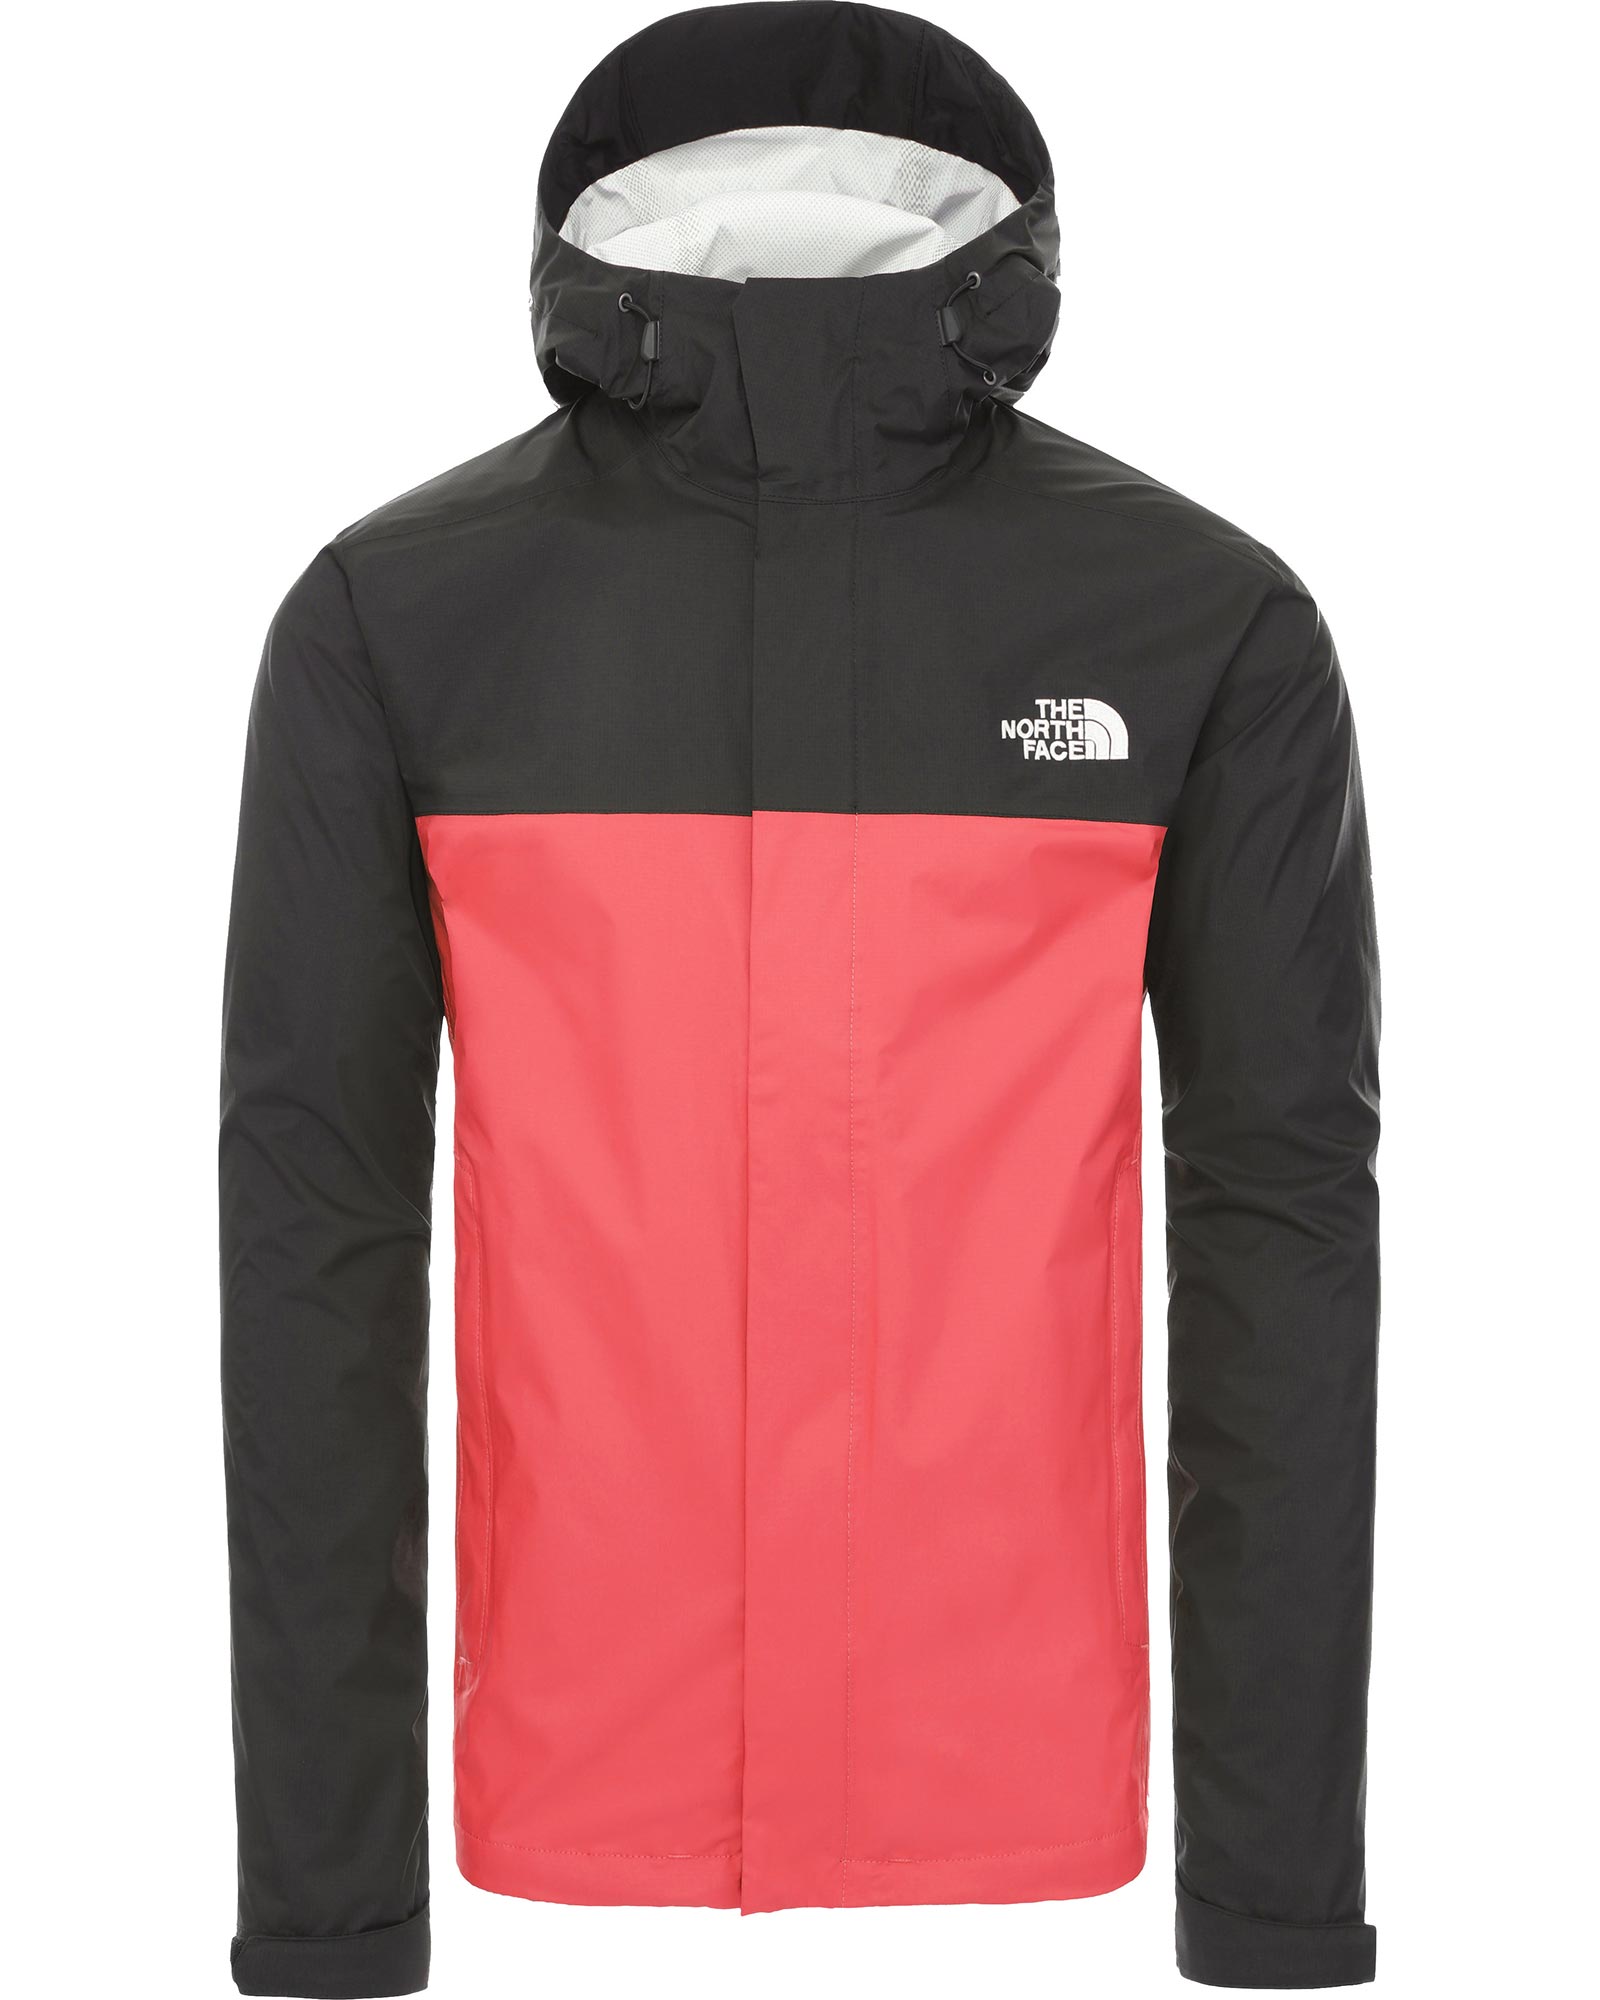 The North Face Venture Men’s Jacket - Fiery Red XS